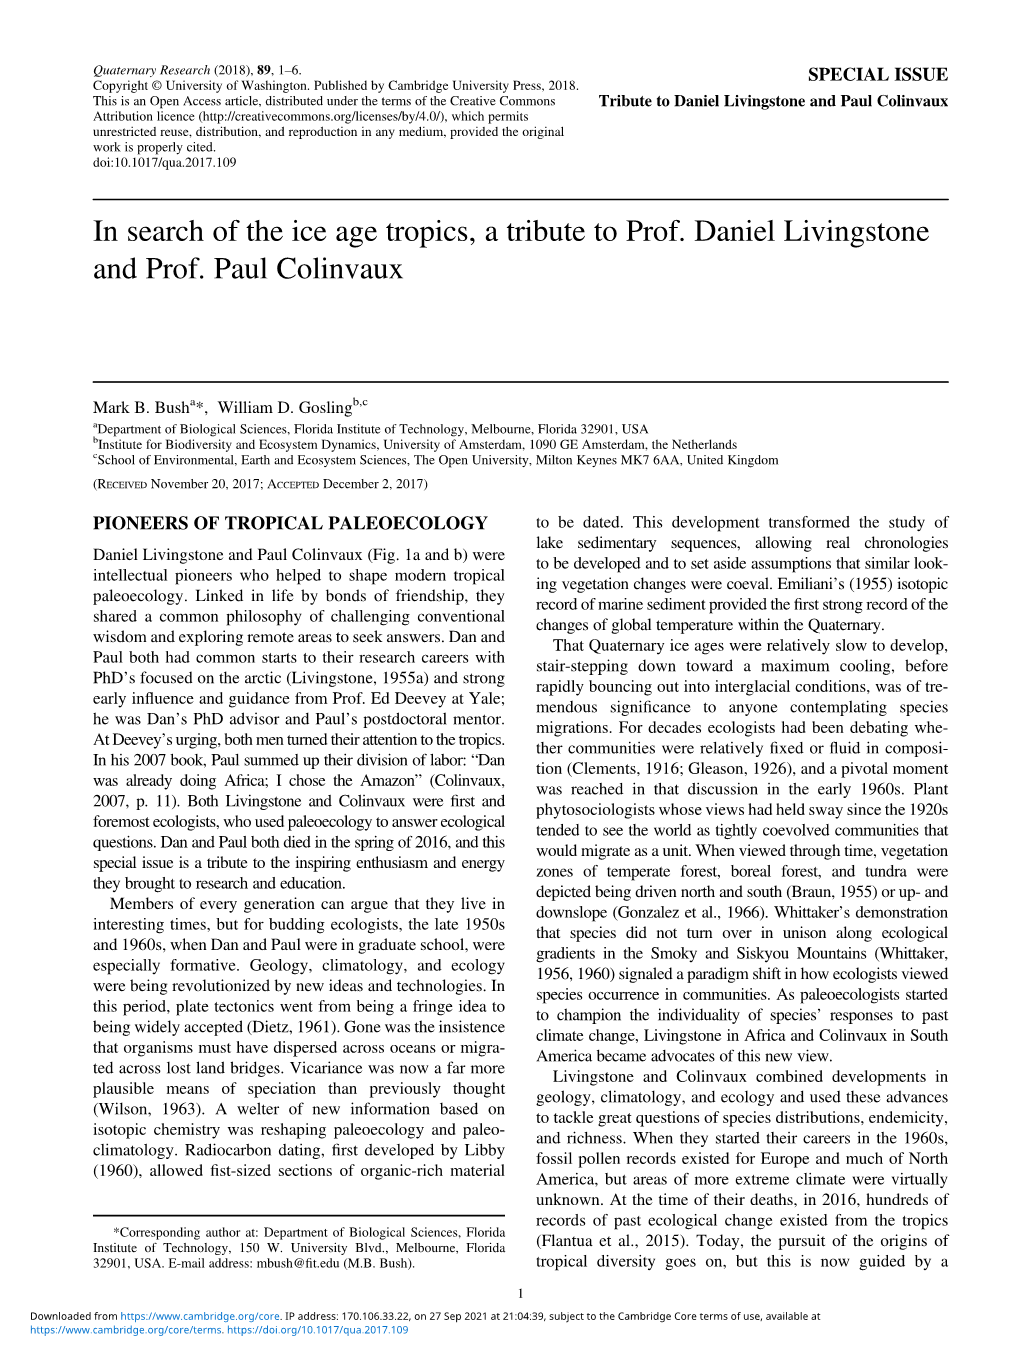 In Search of the Ice Age Tropics, a Tribute to Prof. Daniel Livingstone and Prof